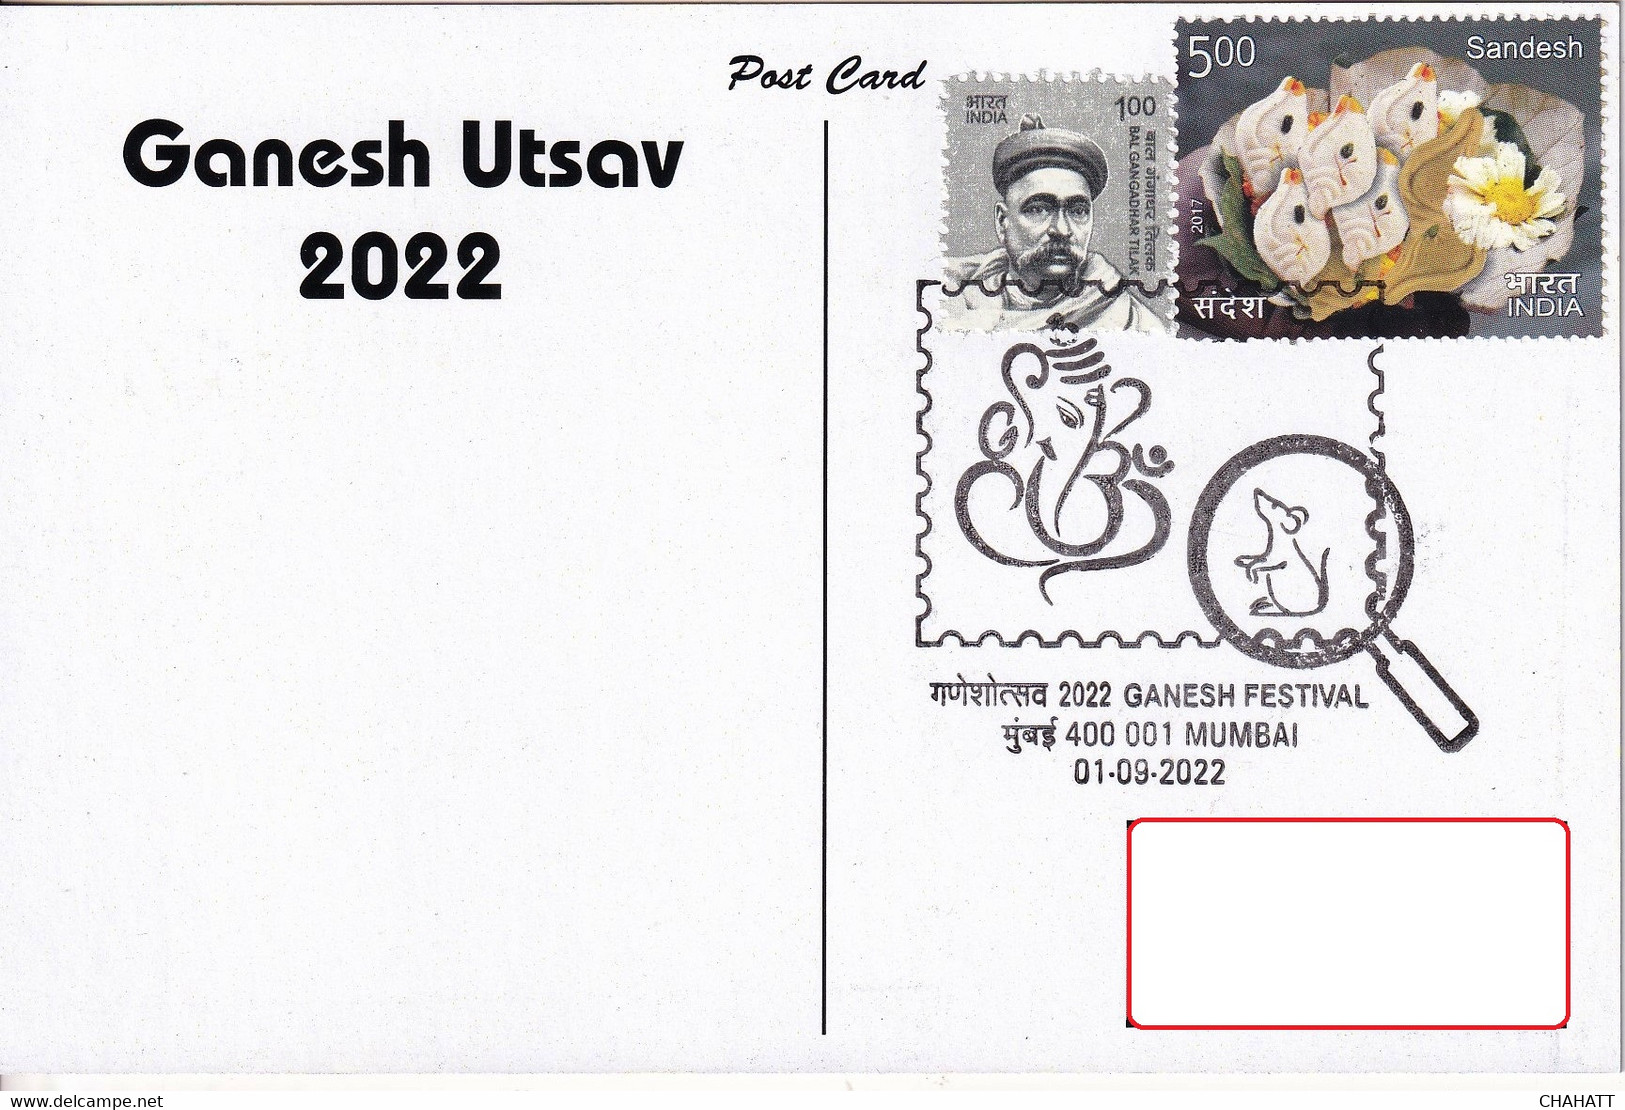 HINDUISM - LORD GANESHA - FESTIVAL -PPC WITH PICTORIAL CANCEL -#6 OF 15 -INDIA-2022- NMC2-35 - Hinduism